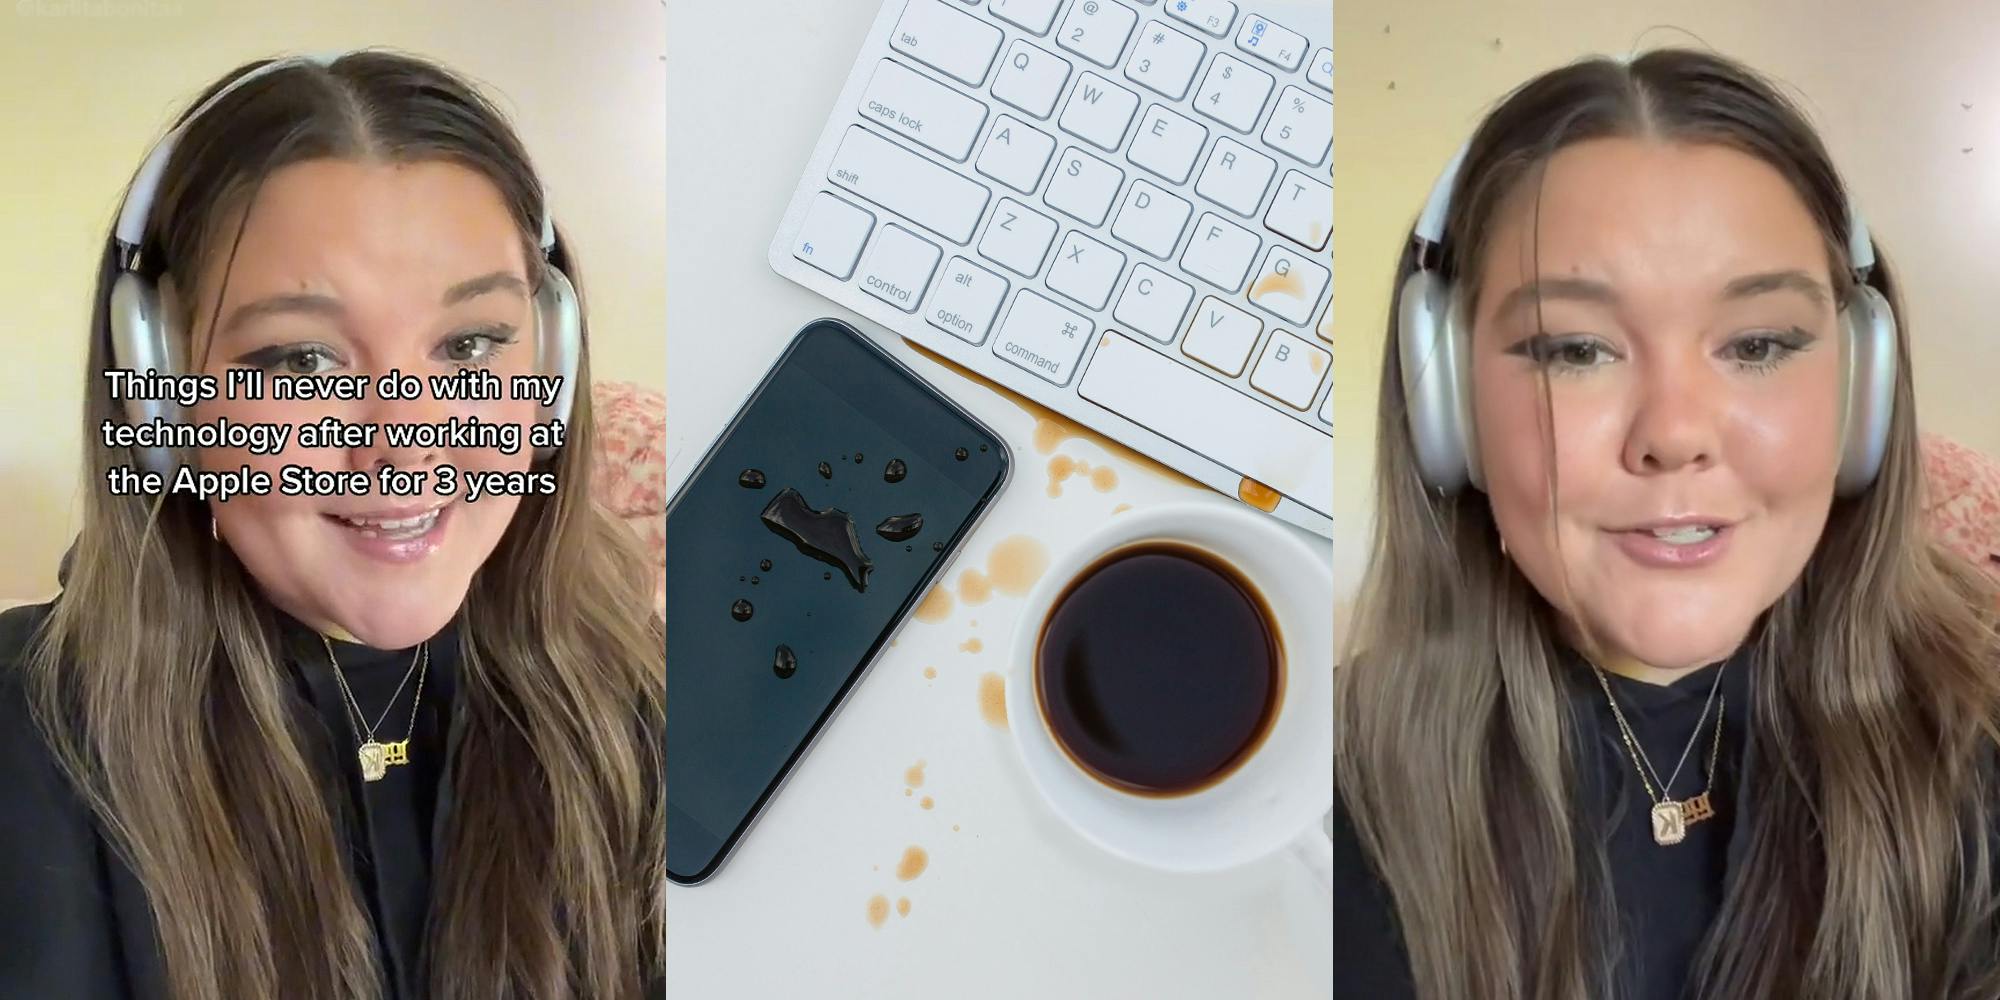 Woman with headphones on speaking caption "Things I'll never do with my technology after working at the Apple Store for 3 years" (l) spilled cup of coffee on iPhone and keyboard on white surface (c) woman with headphones speaking (r)